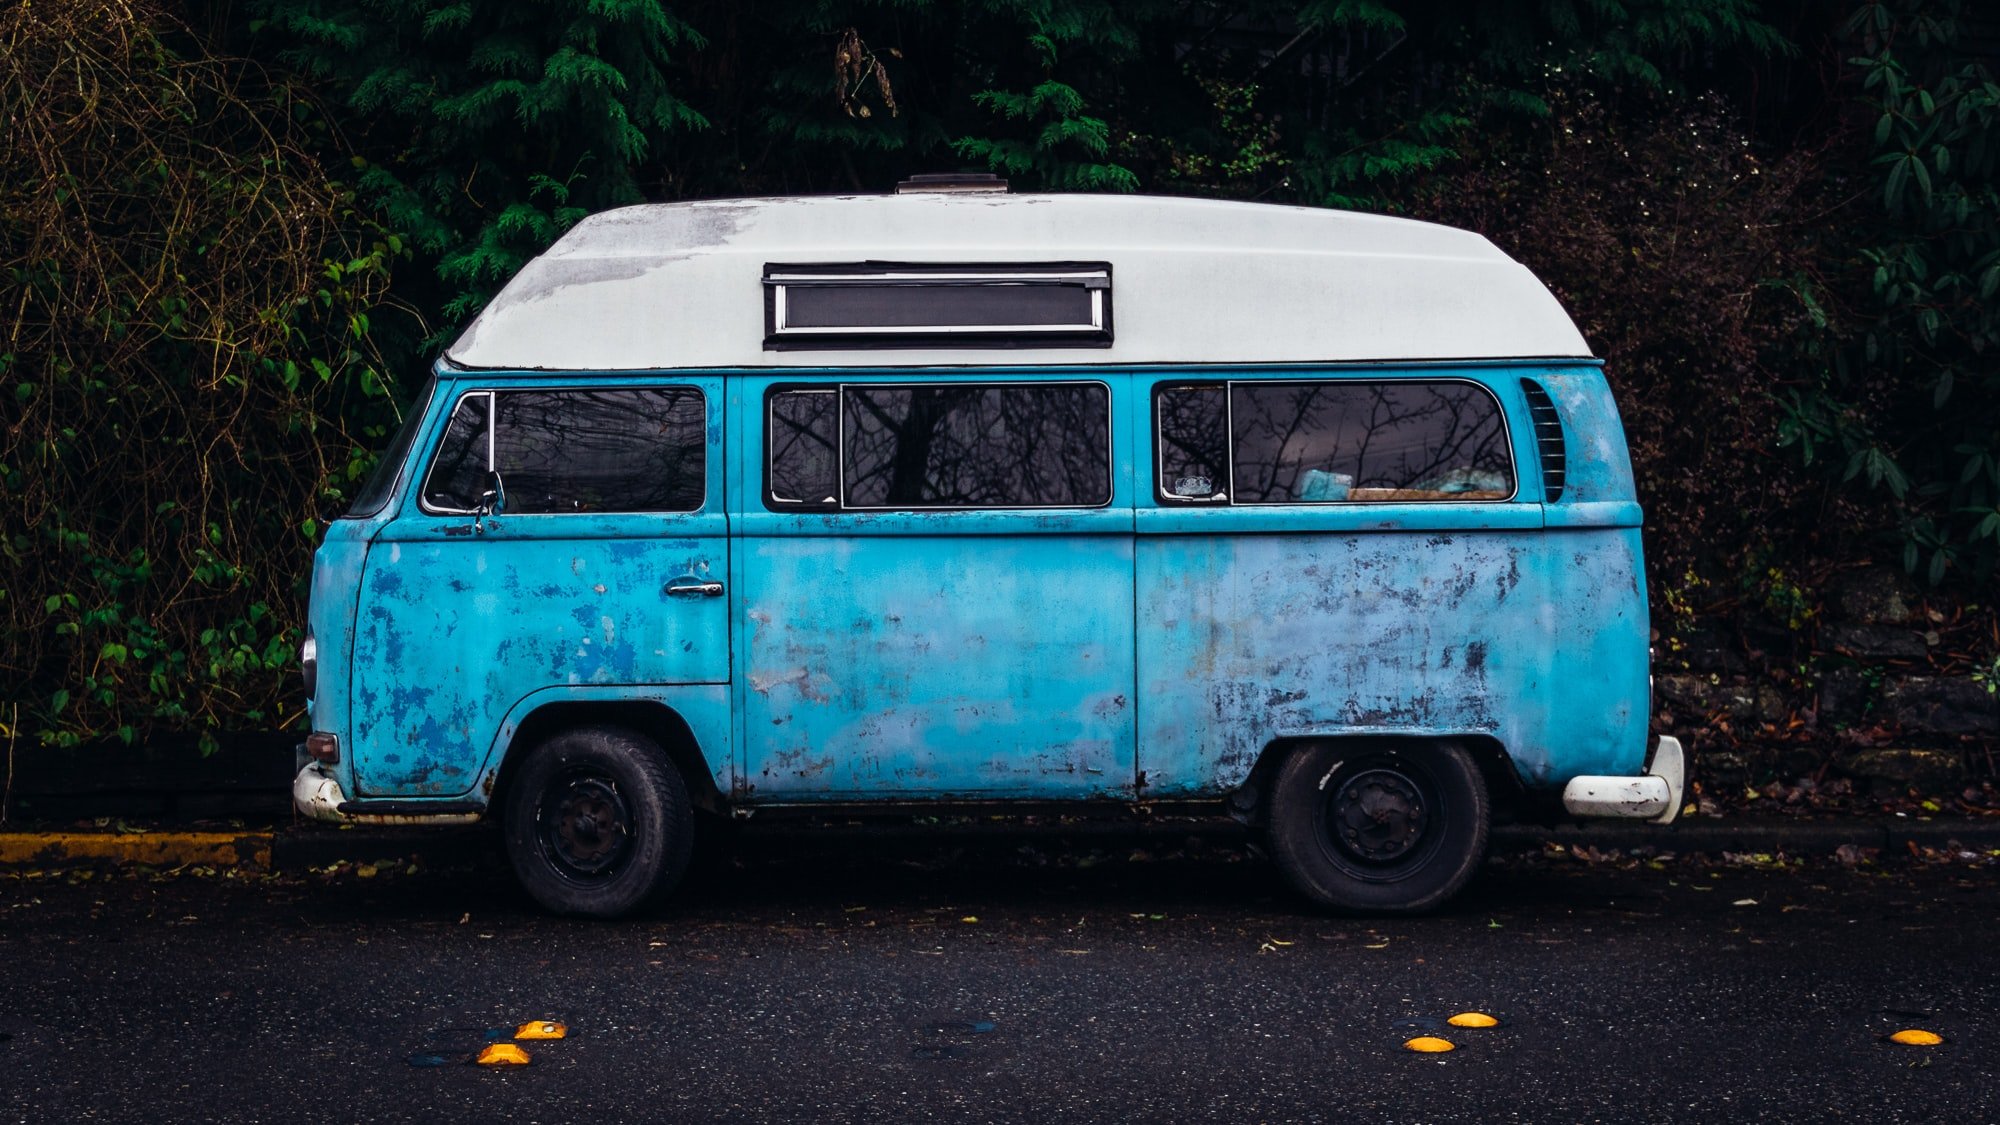 Carla learned that Jenny was living in an abandoned van. | Source: Unsplash